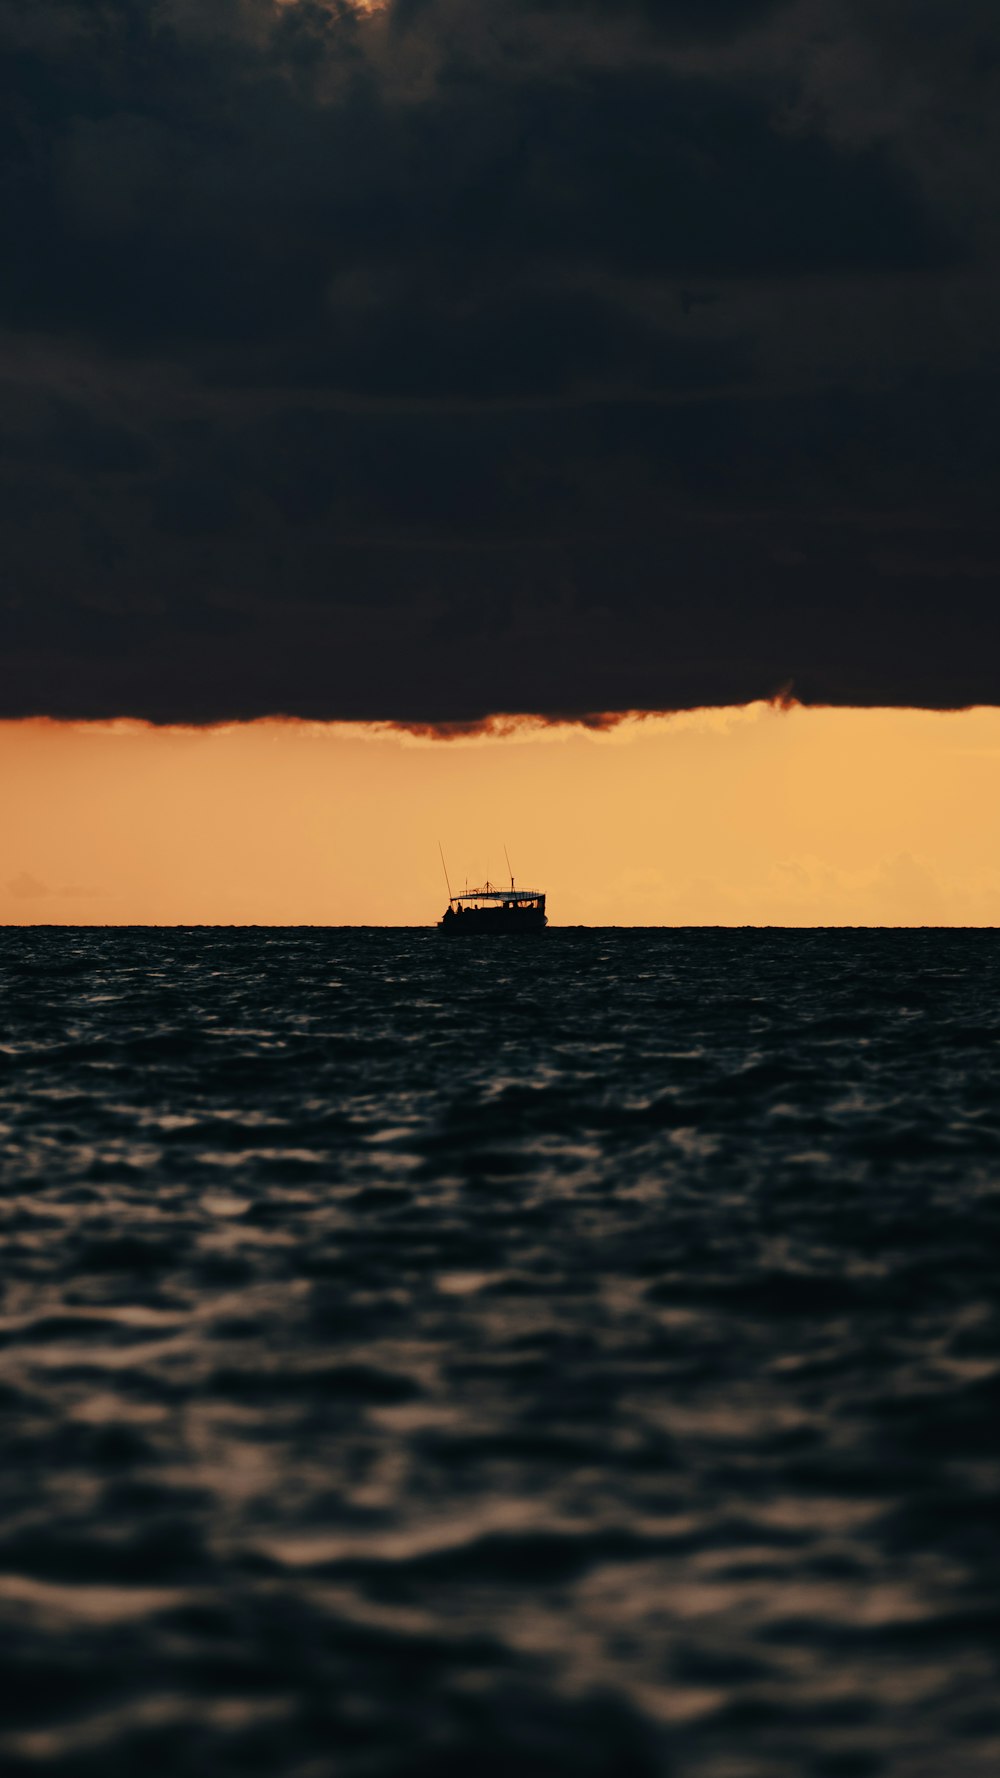 a boat in the middle of the ocean under a cloudy sky